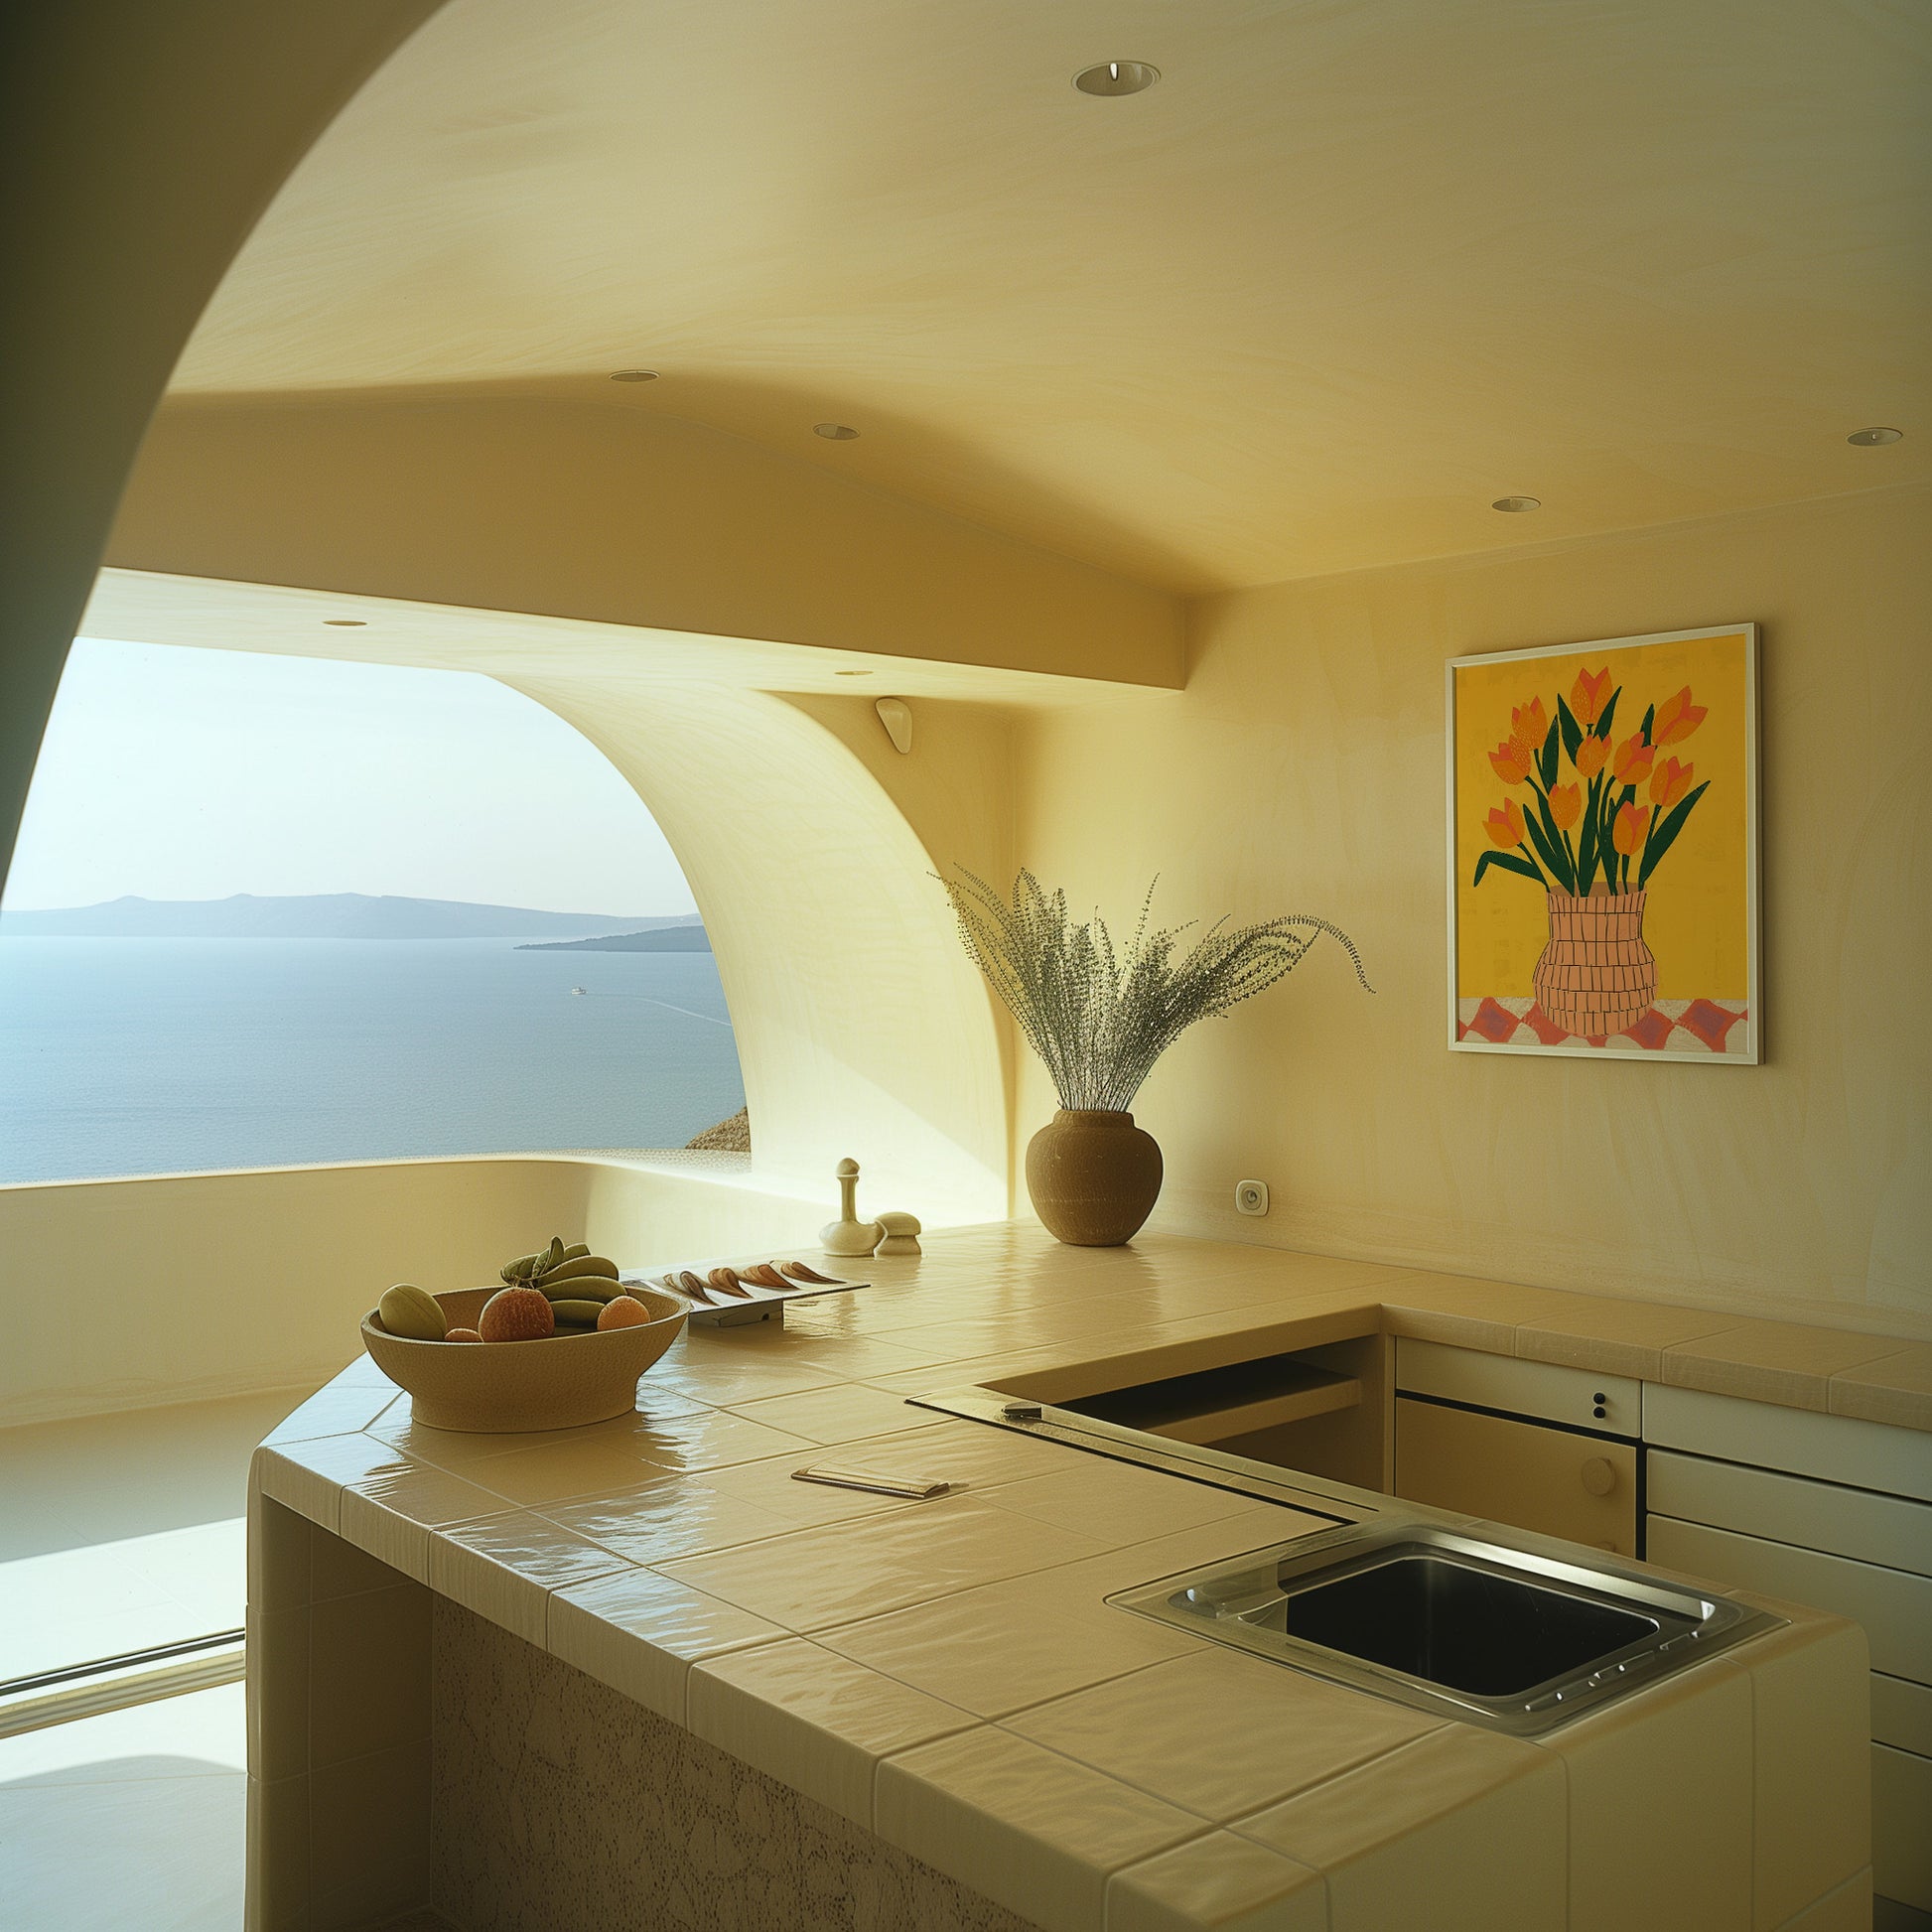 Modern kitchen with a sea view, arched ceiling, and a bright floral painting.